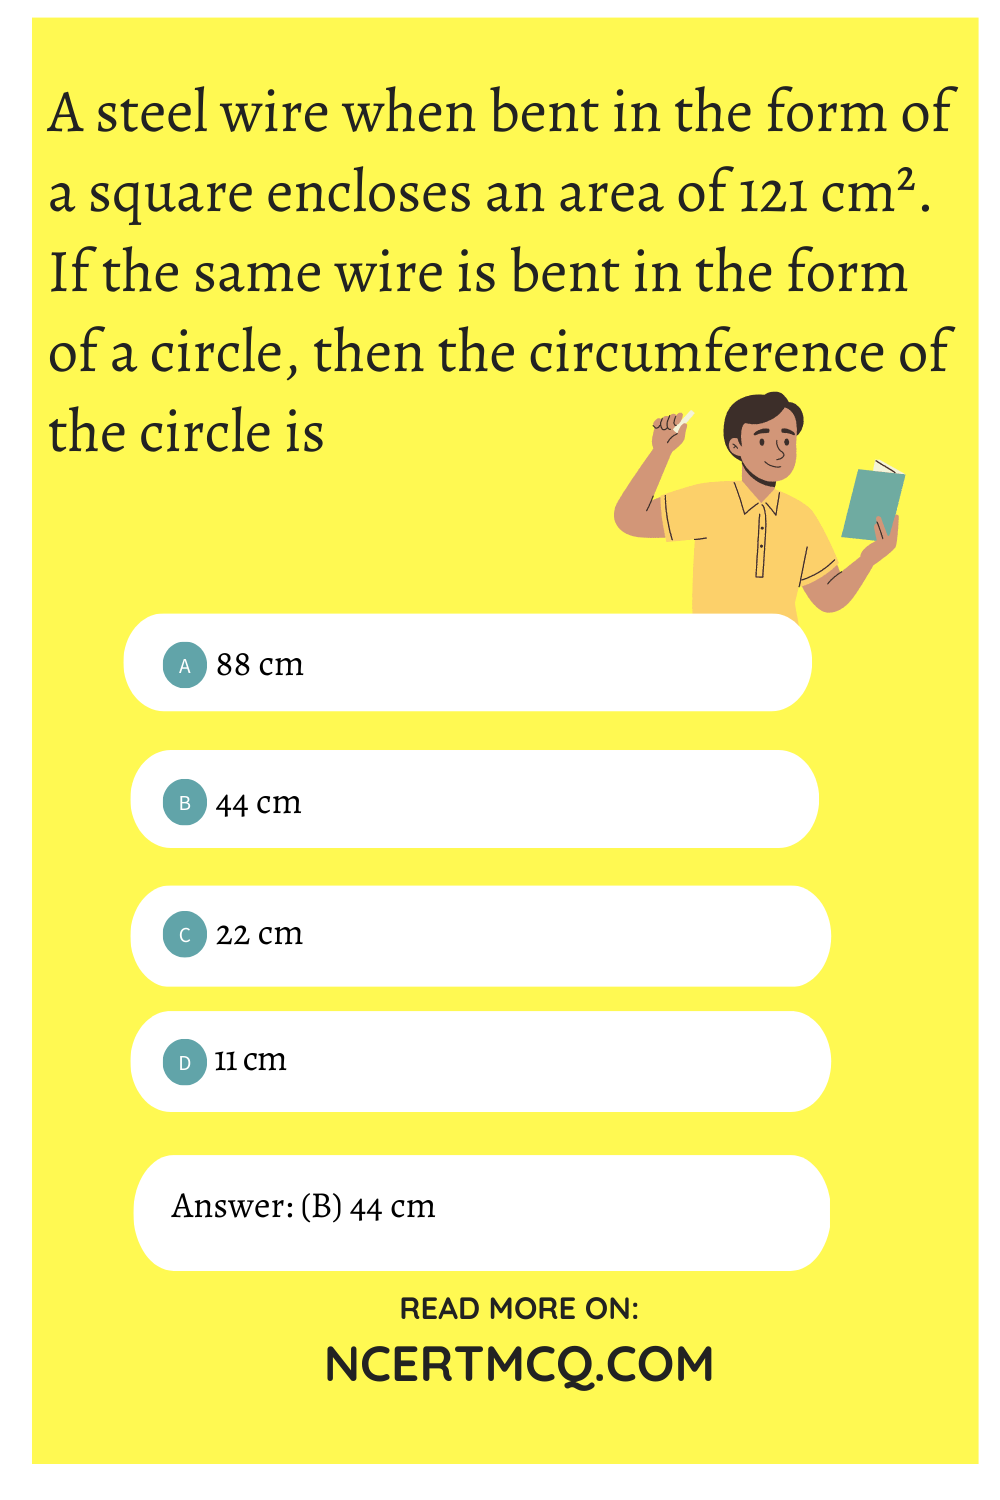 A steel wire when bent in the form of a square encloses an area of 121 cm². If the same wire is bent in the form of a circle, then the circumference of the circle is